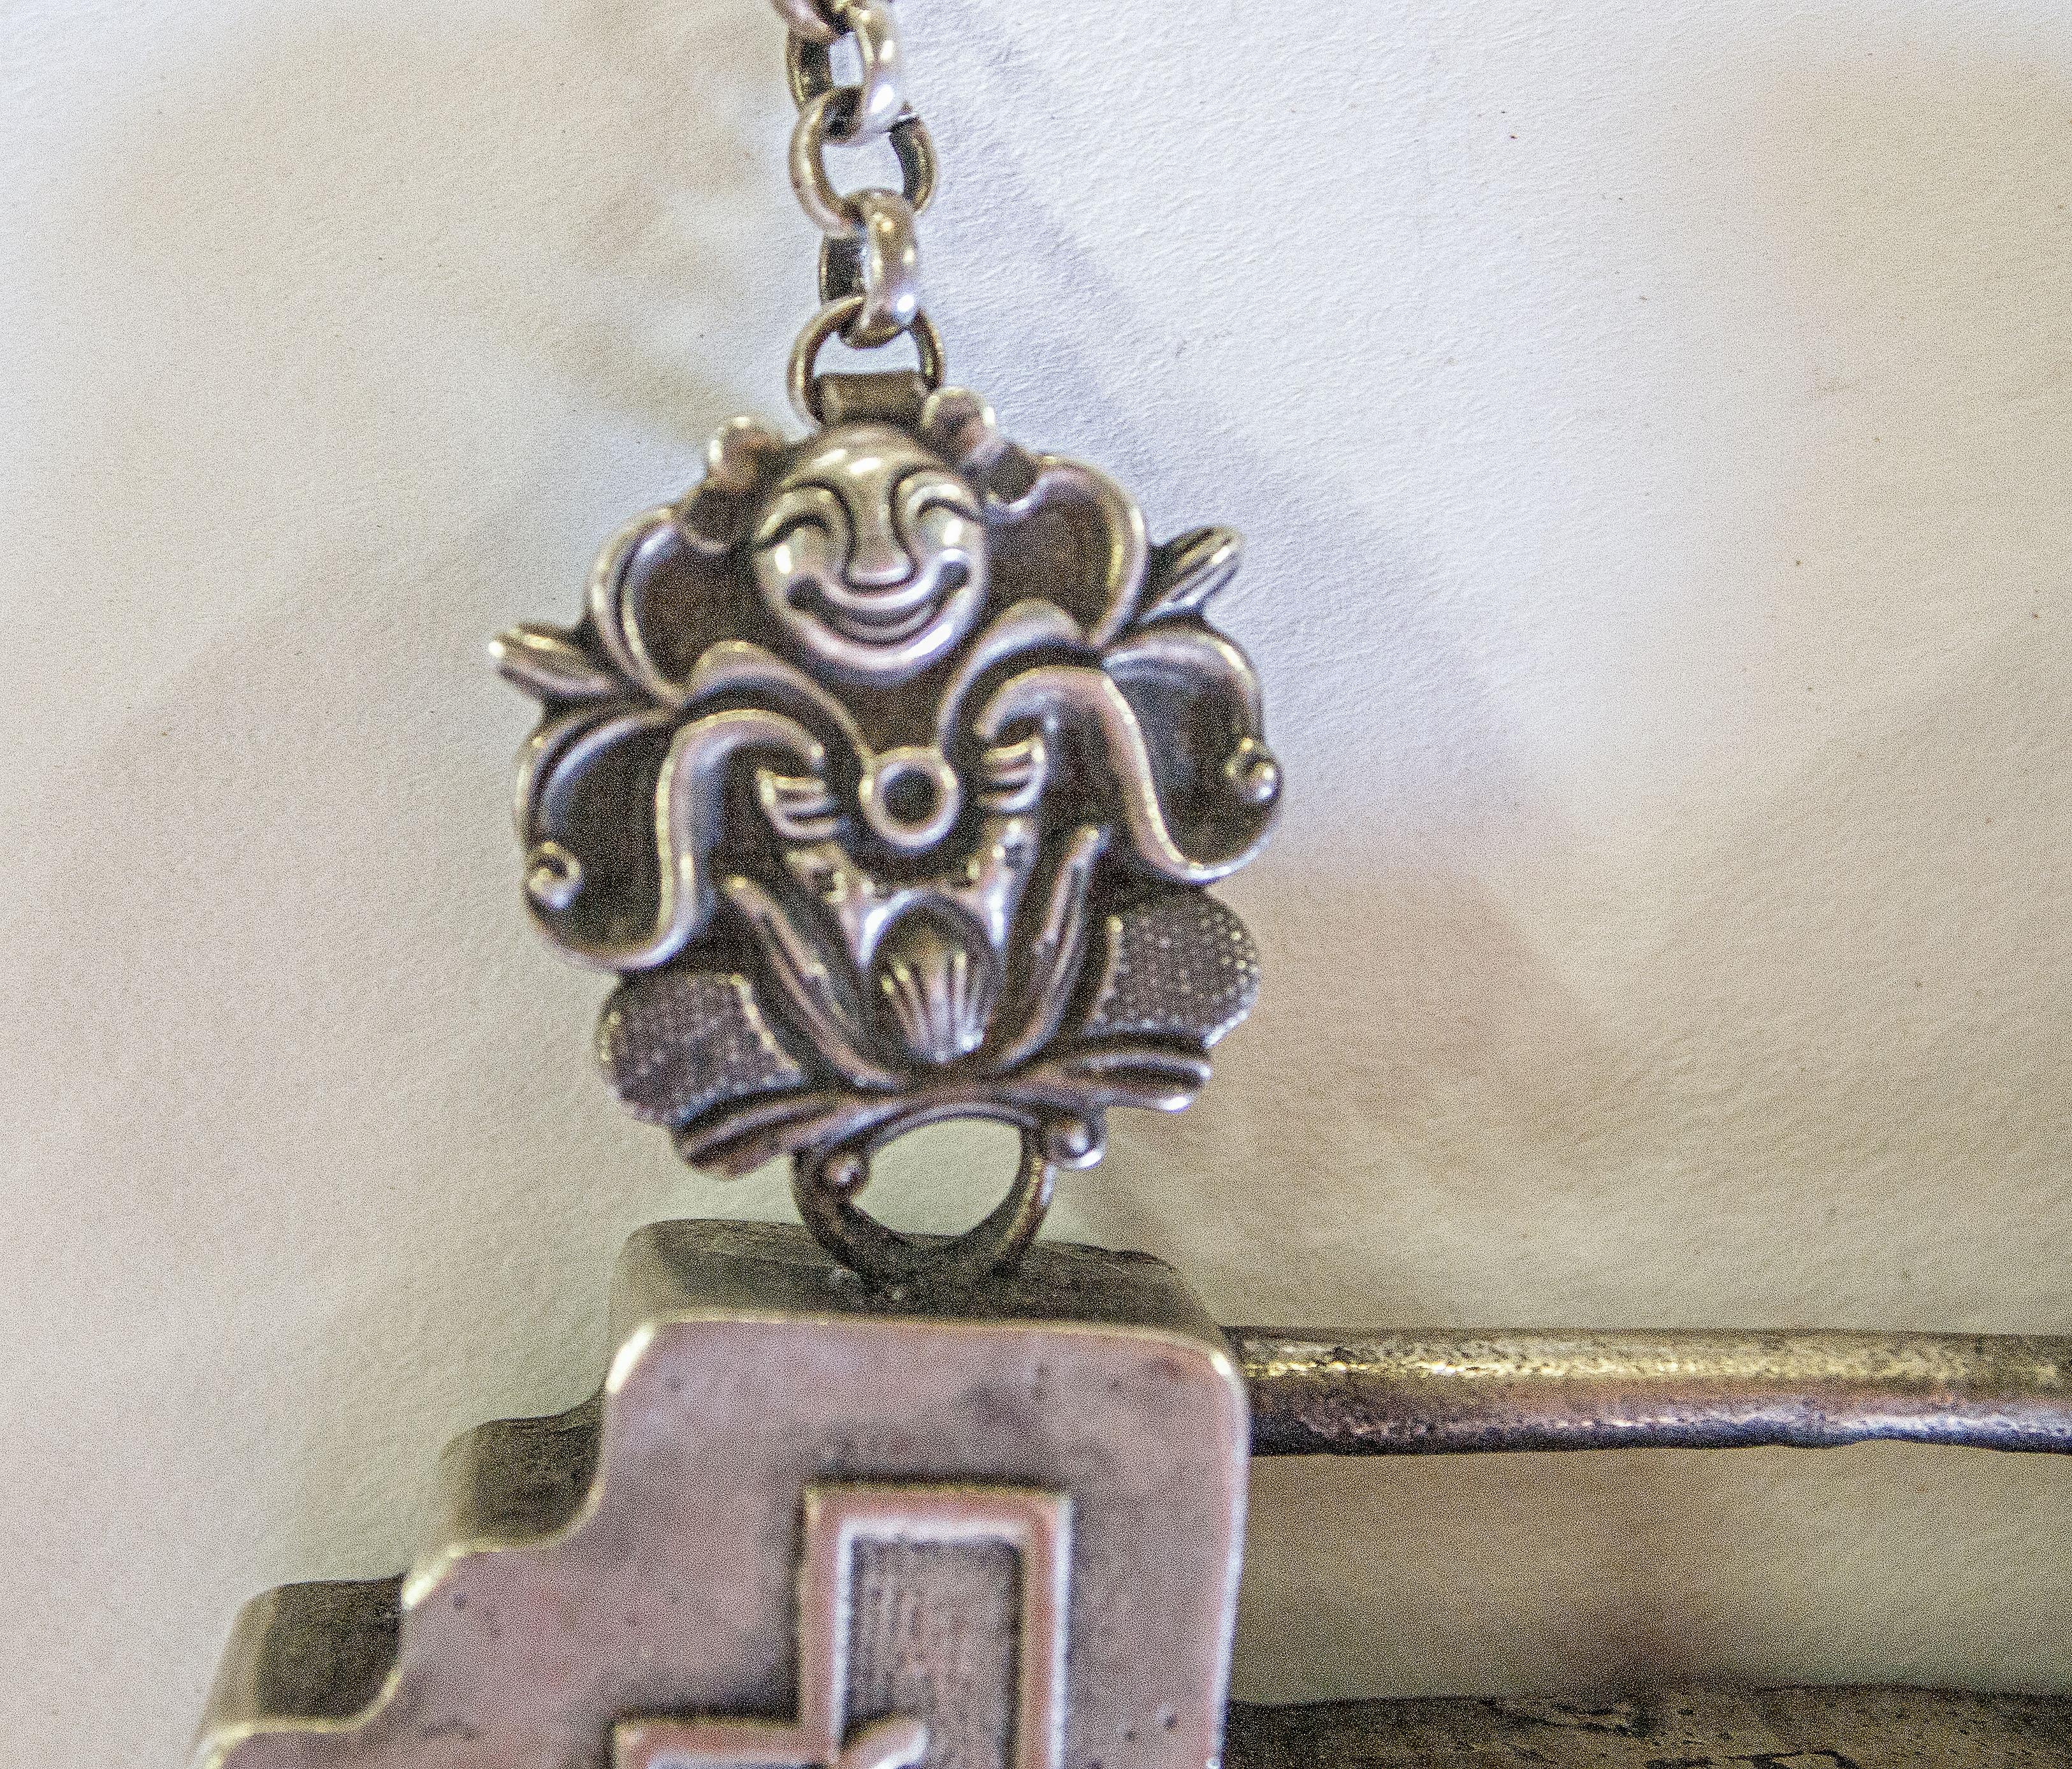 Metal Child Amulet Lock, Silver Alloy, Yao or Hmong of SW China, Early 20th Century